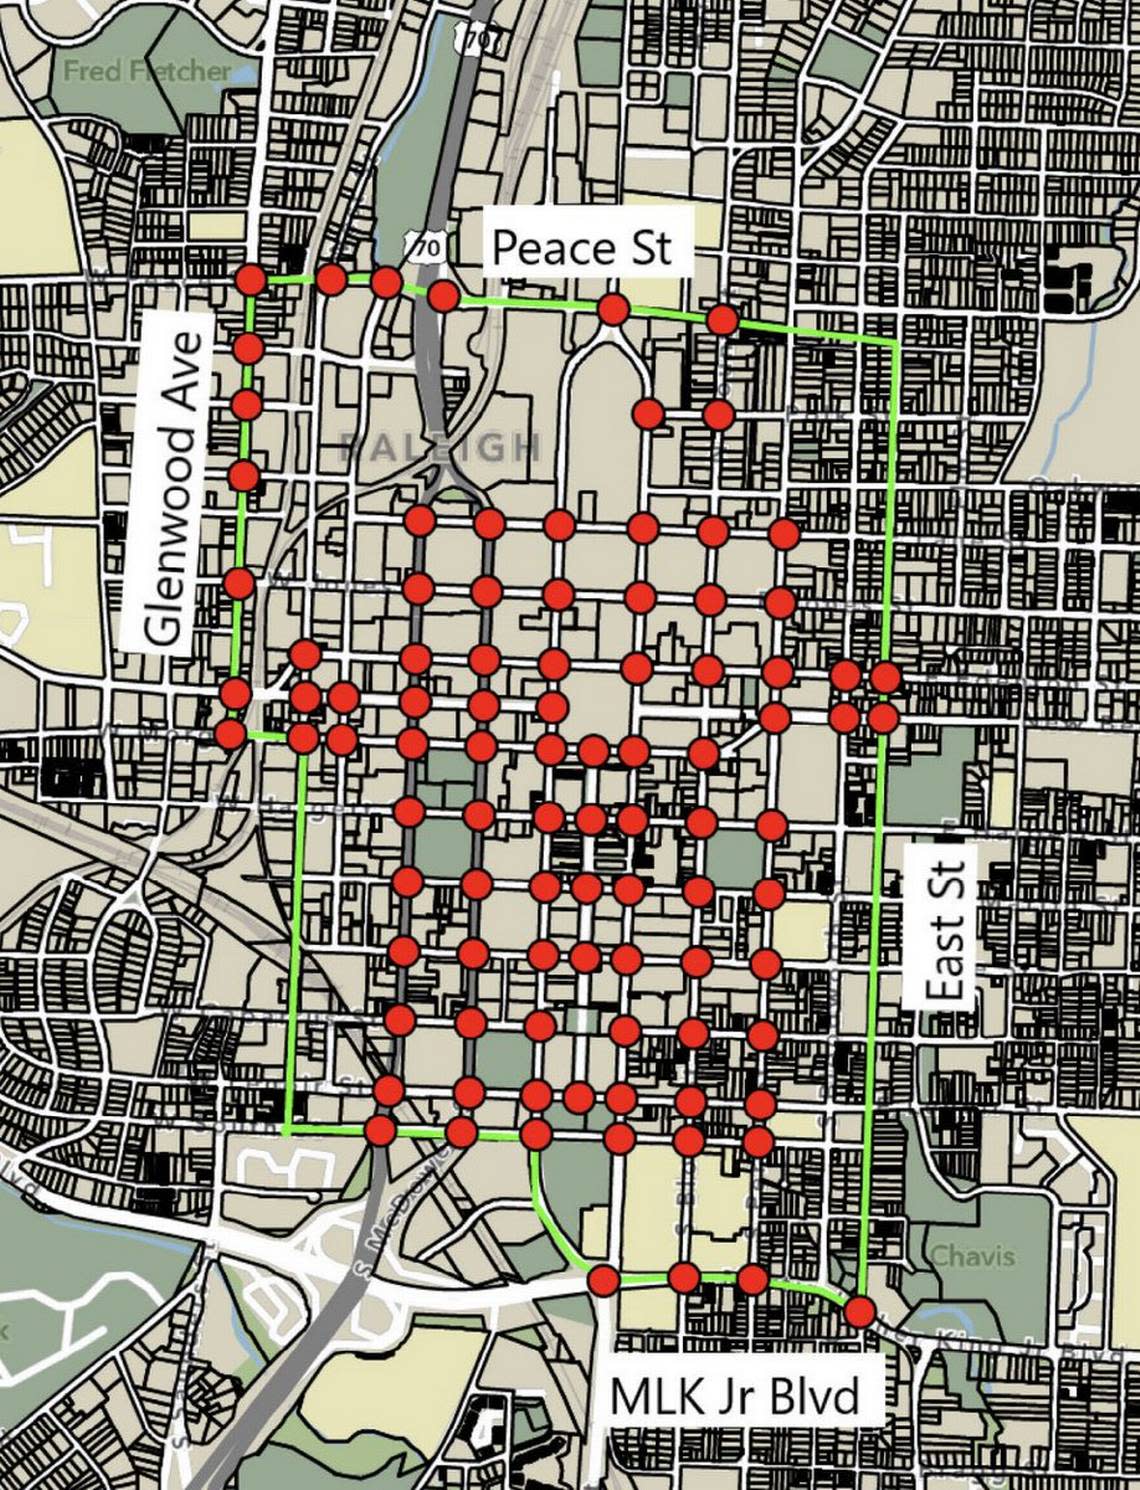 The City of Raleigh tweeted this photo on March 7, 2023 with the caption “City Council authorized changes in the Traffic Schedule to add NO TURN ON RED for the downtown core. Signs will be installed in the area this spring, with an estimated completion date by the end of April.”